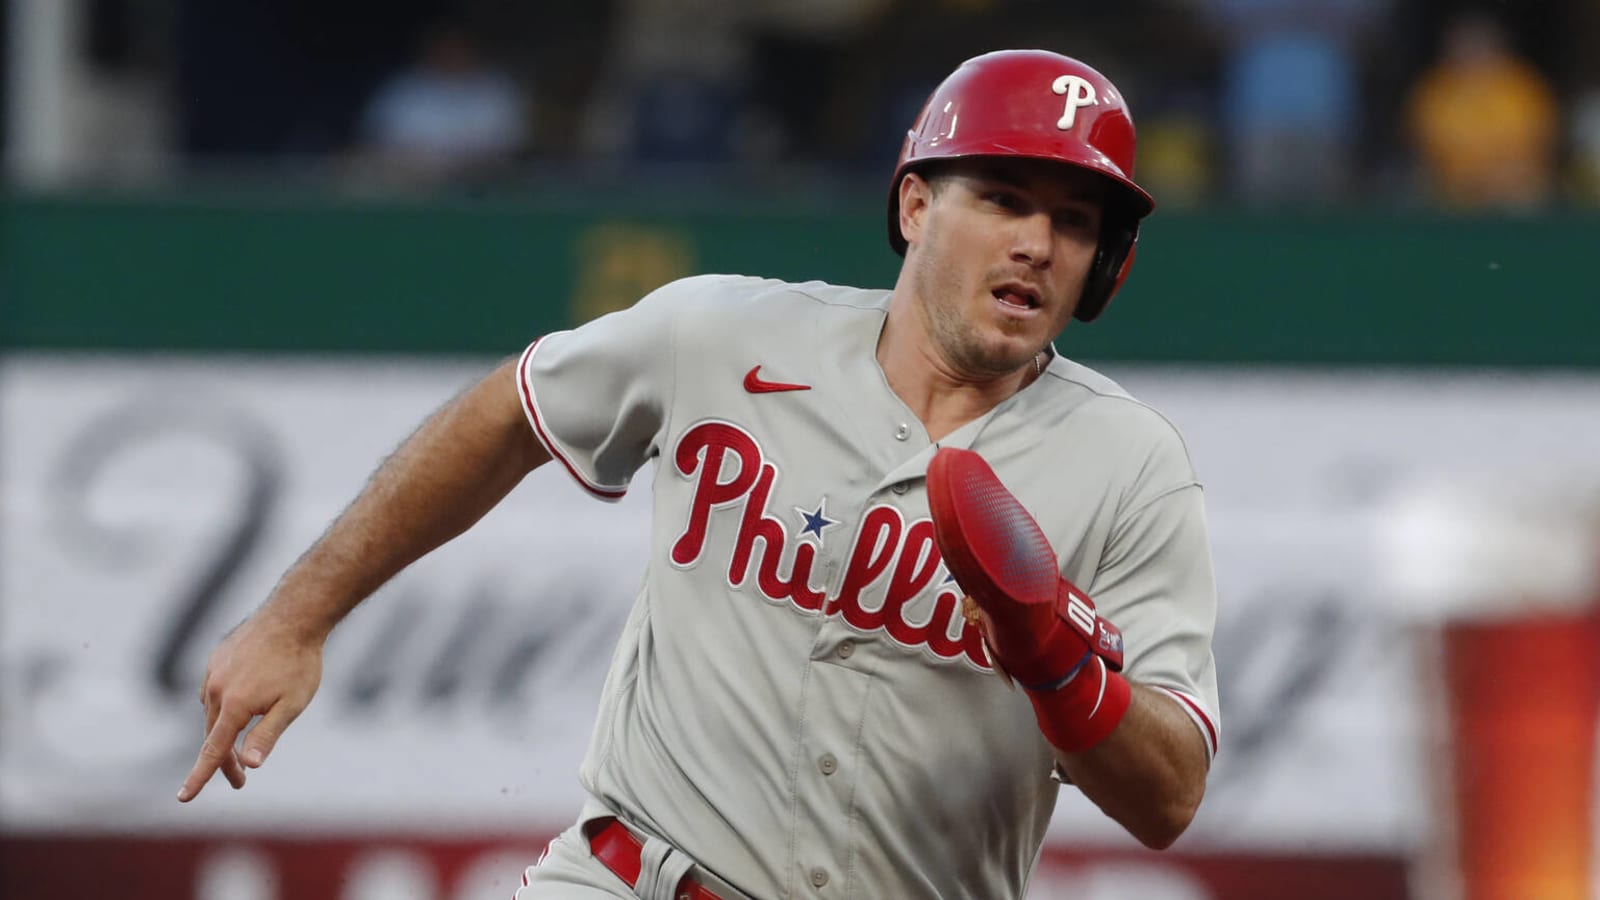 Phillies manager has funny explanation for star catcher's statistics